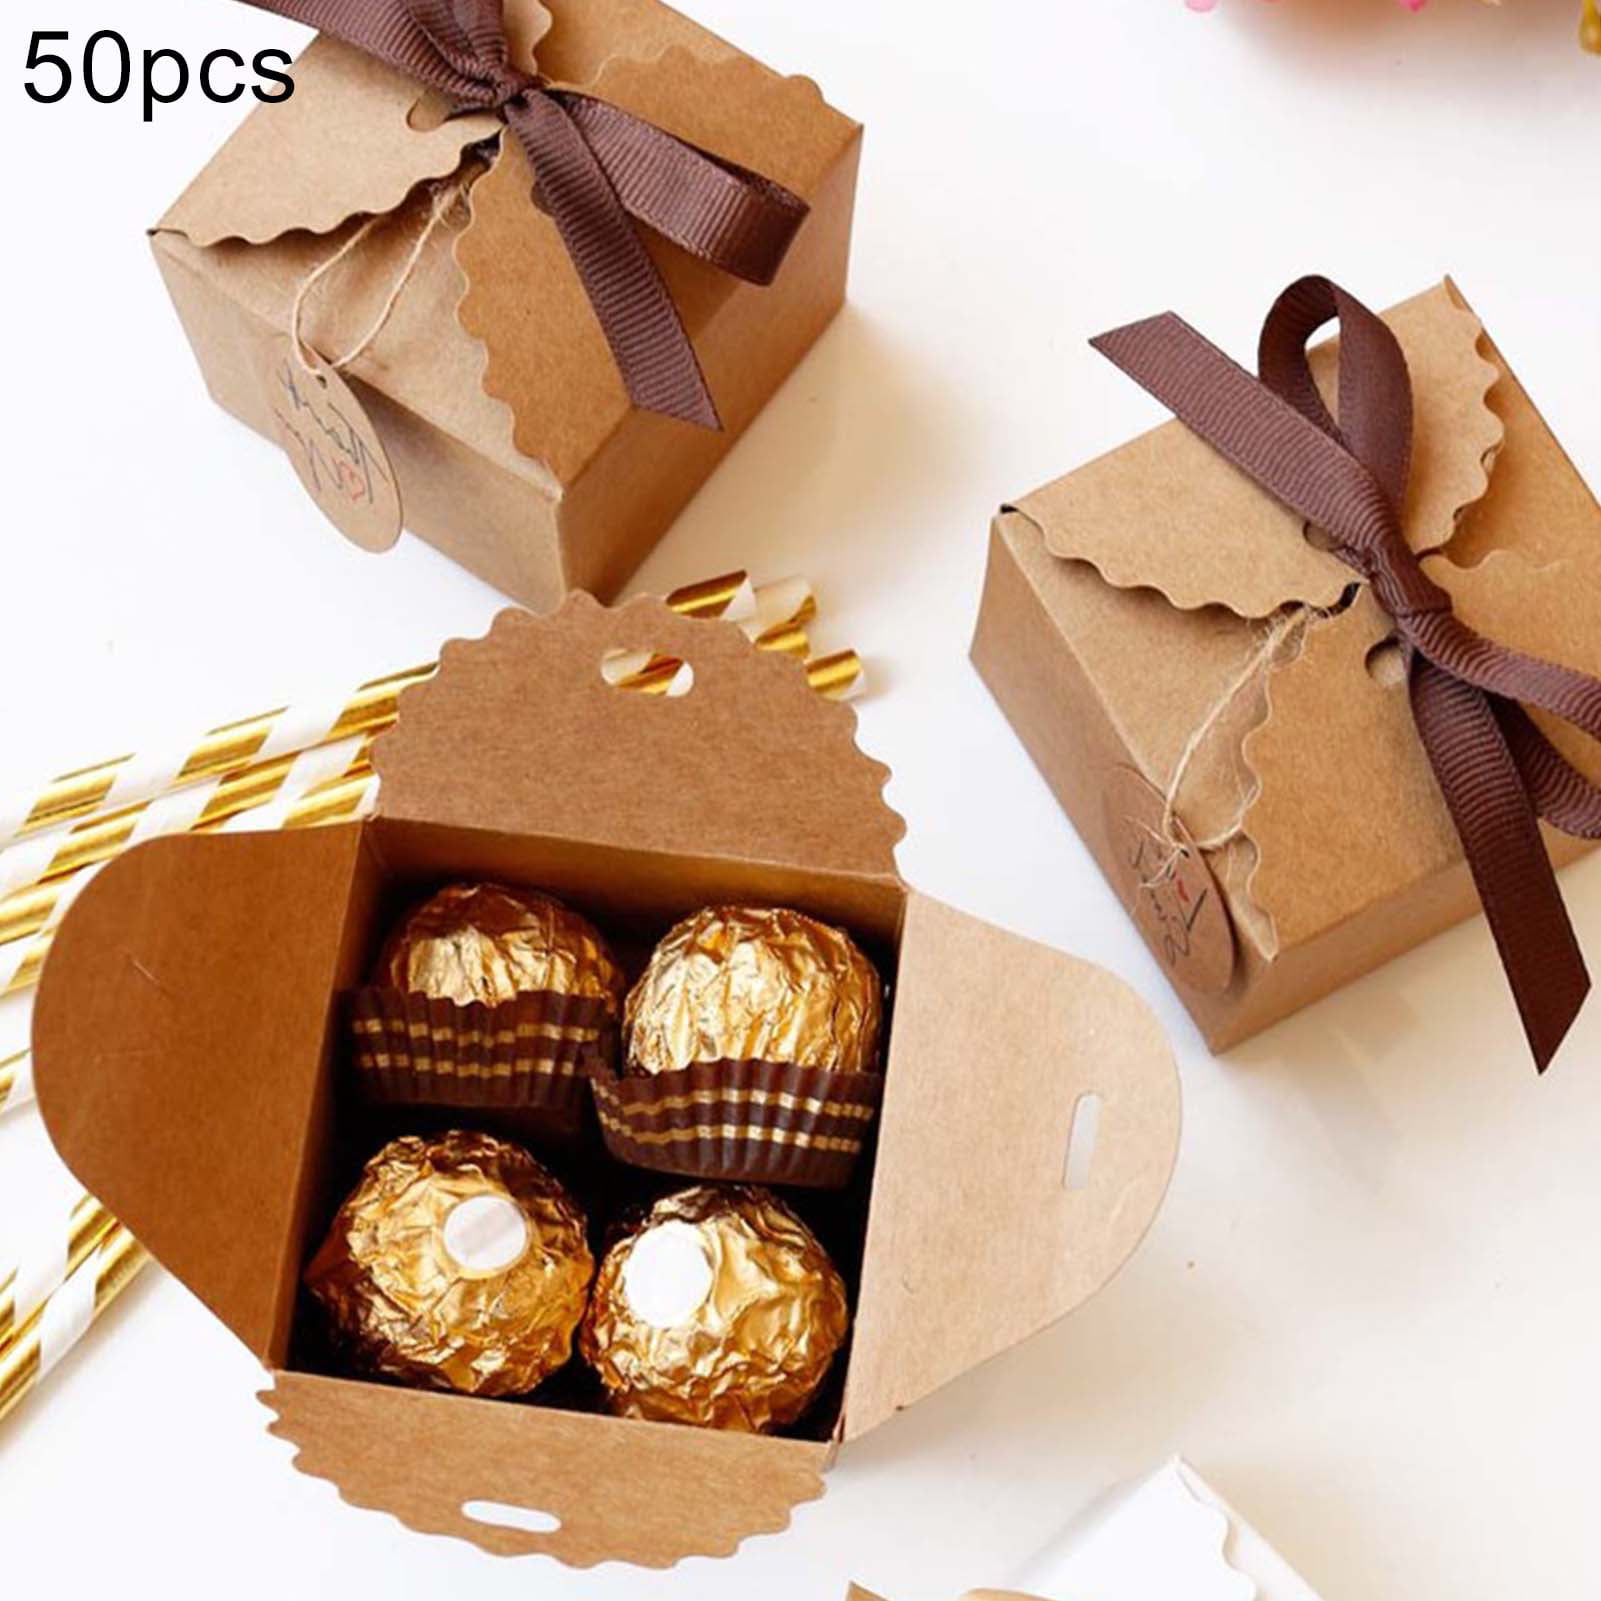 50pcs DIY Vintage Travel Candy Box Chocolate Packaging Gift Box Party Wedding 